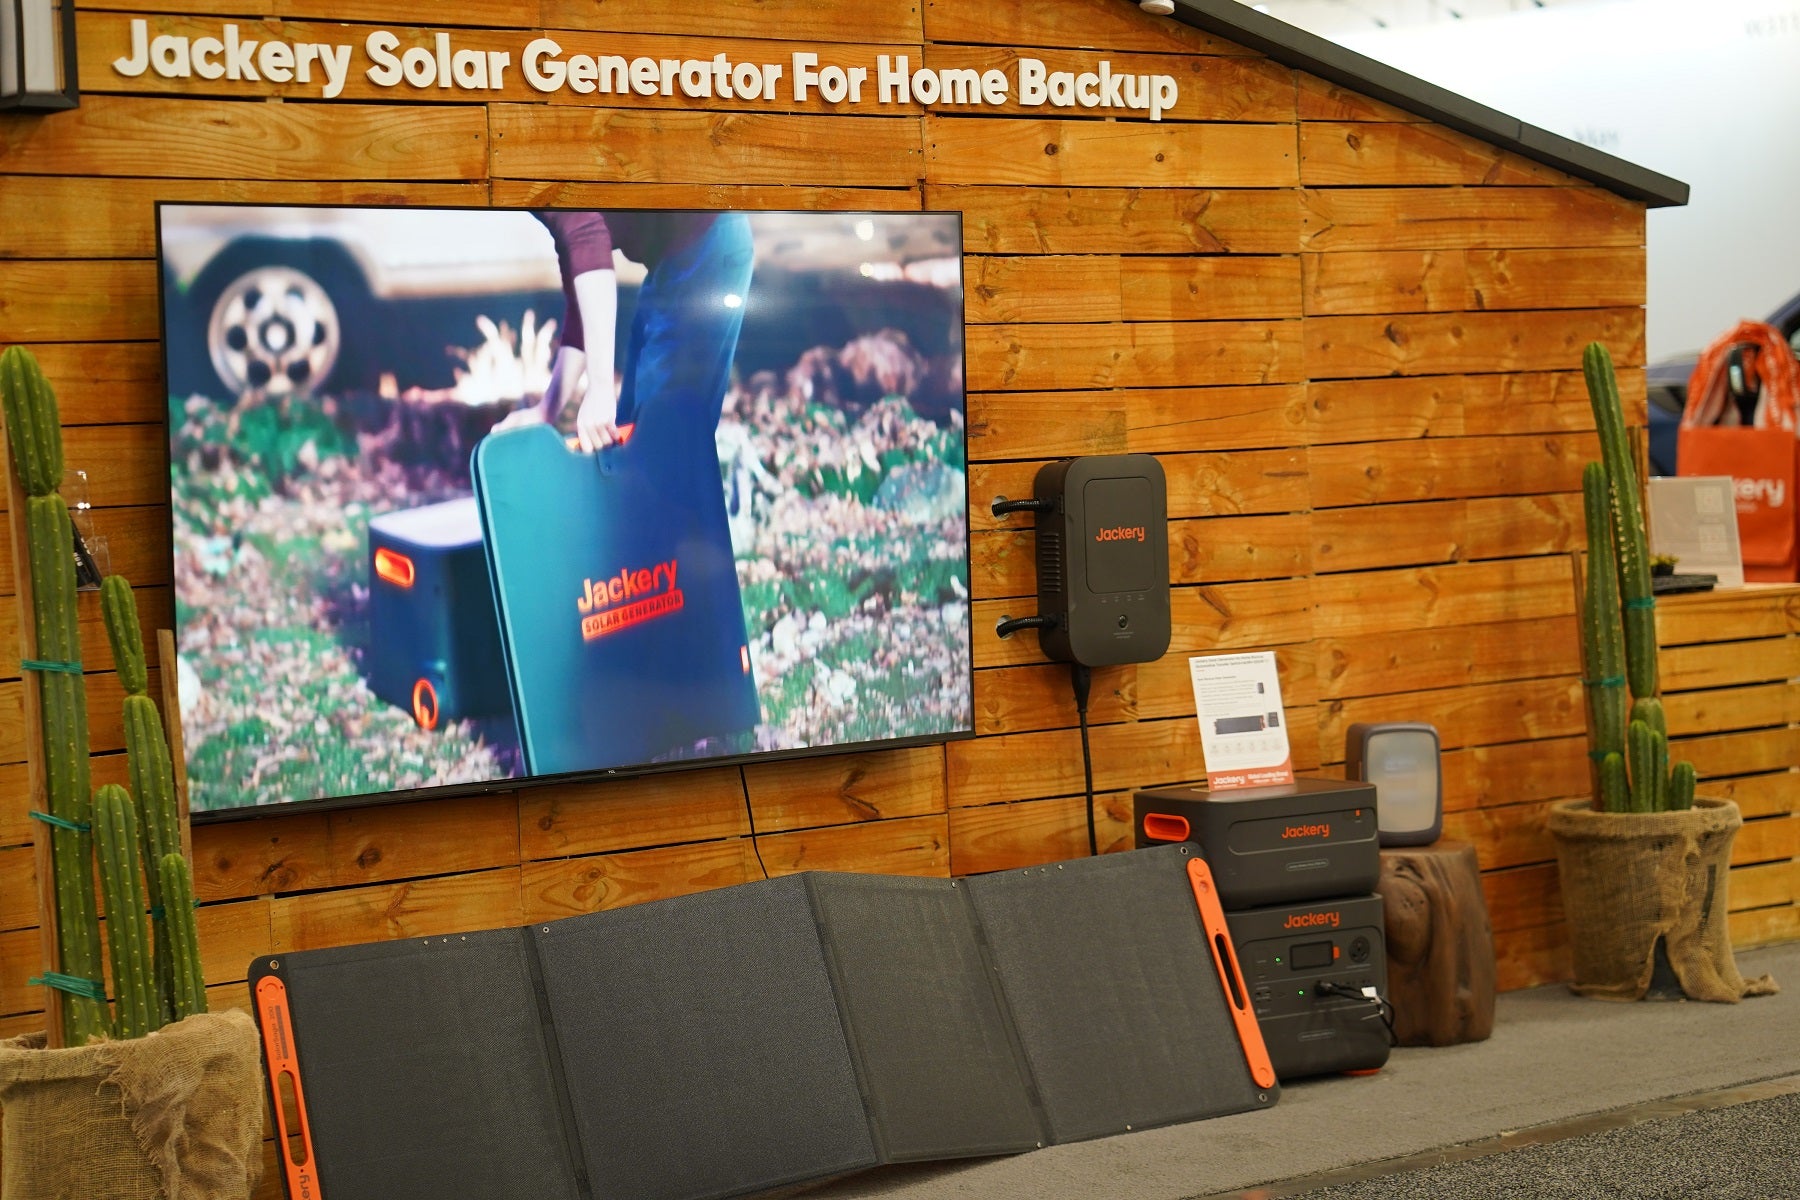 Jackery to Power Up the National Hardware Show (NHS) with Innovative Solar Solutions